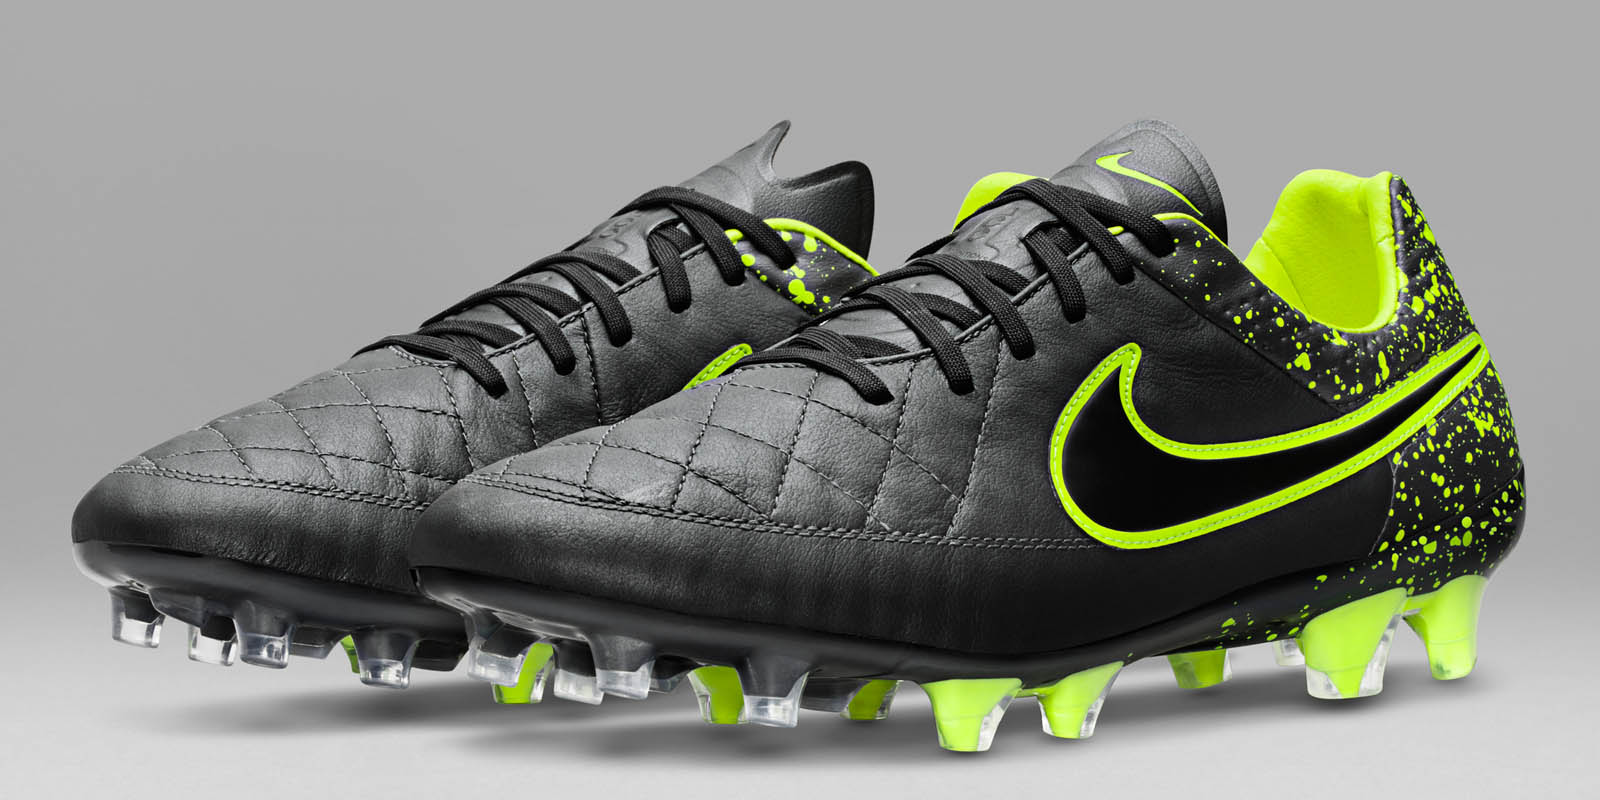 Anthracite Volt Nike Tiempo Legend 2015-2016 Boots Released - Footy Headlines